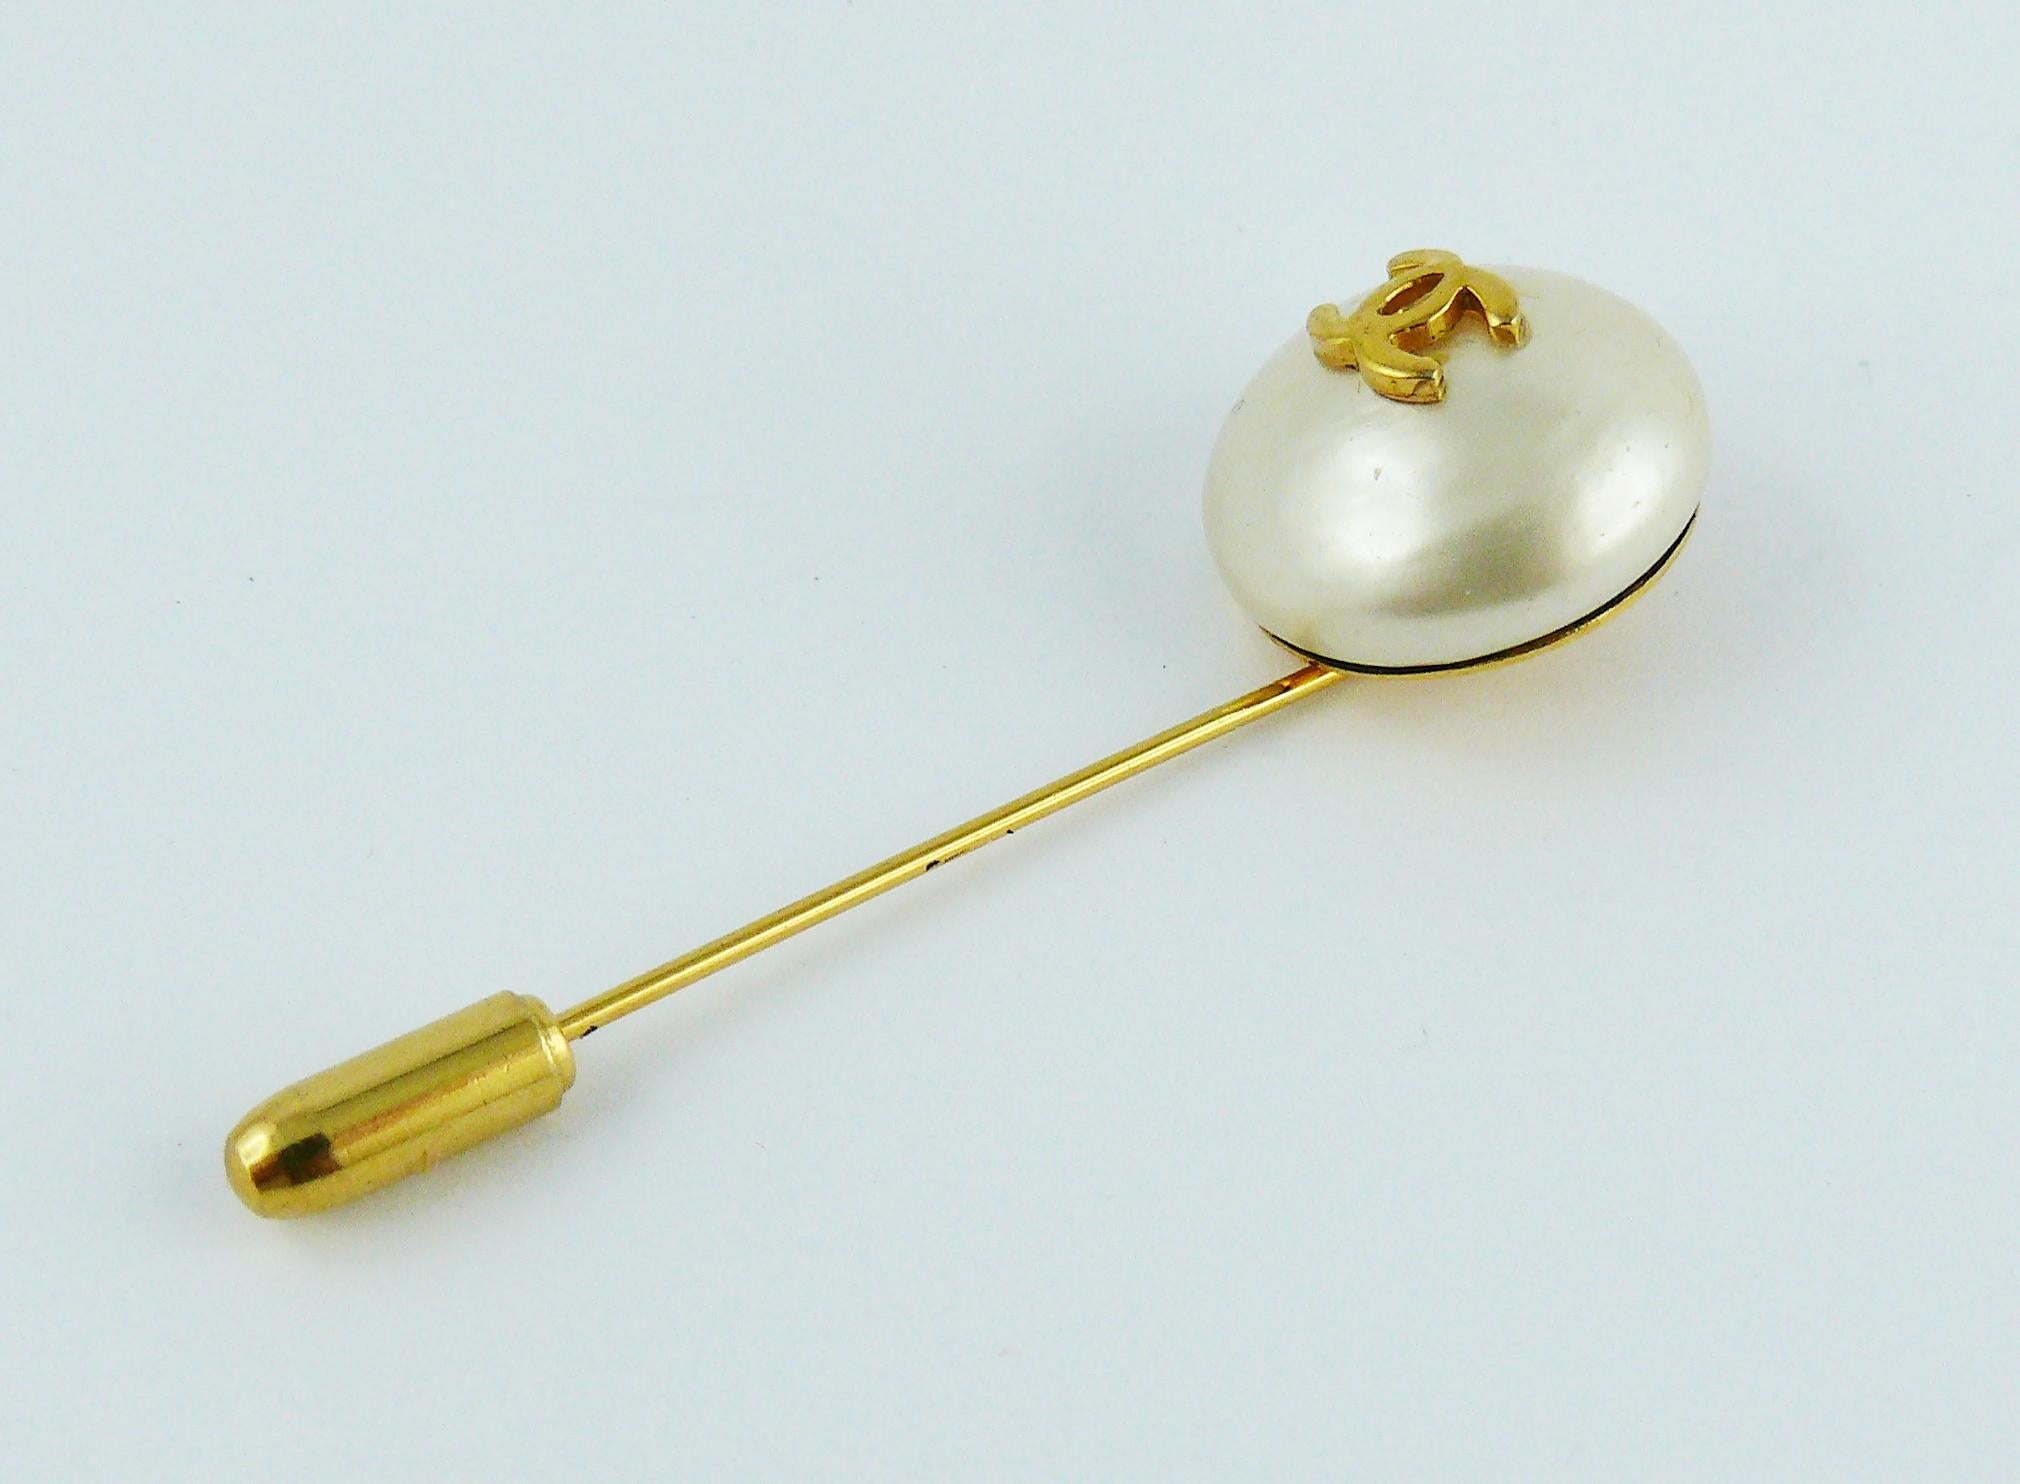 CHANEL vintage gold toned pearl lapel pin with CC logo.

Embossed CHANEL.
Made in France.

Indicative measurements : length approx. 5.3 cm (2.09 inches) / pearl diameter approx. 1.5 cm (0.59 inch).

JEWELRY CONDITION CHART
- New or never worn : item